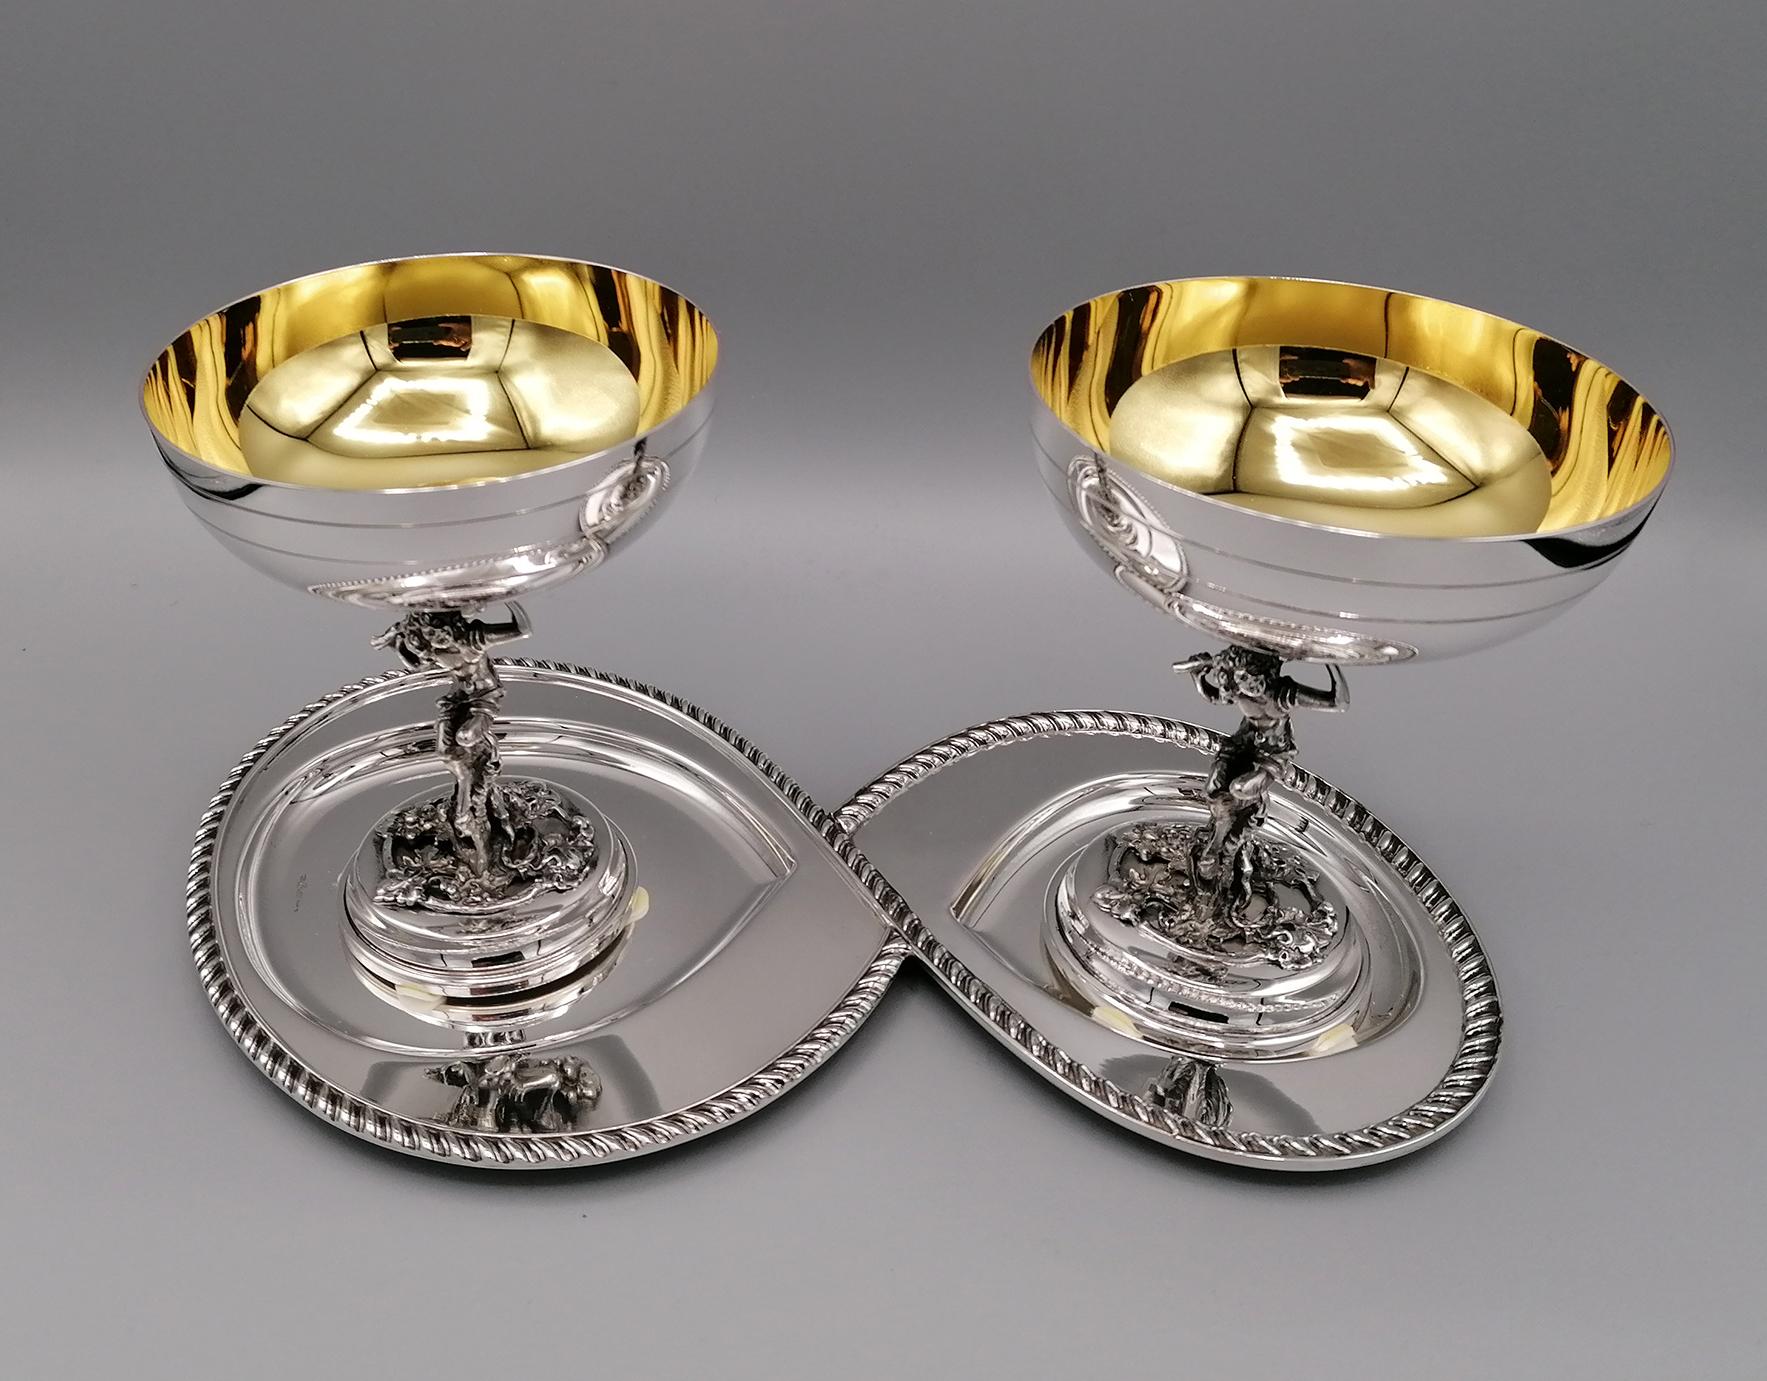 Stylized and shaped silver tray in 800 silver made to support 2 champagne cups in sterling silver.
The tray has a corded edge typical of the Queen Anne style.
Tray by Bellotto Argenterie - Padua, Italy, size: cm. 27 x 13

The champagne cups are in